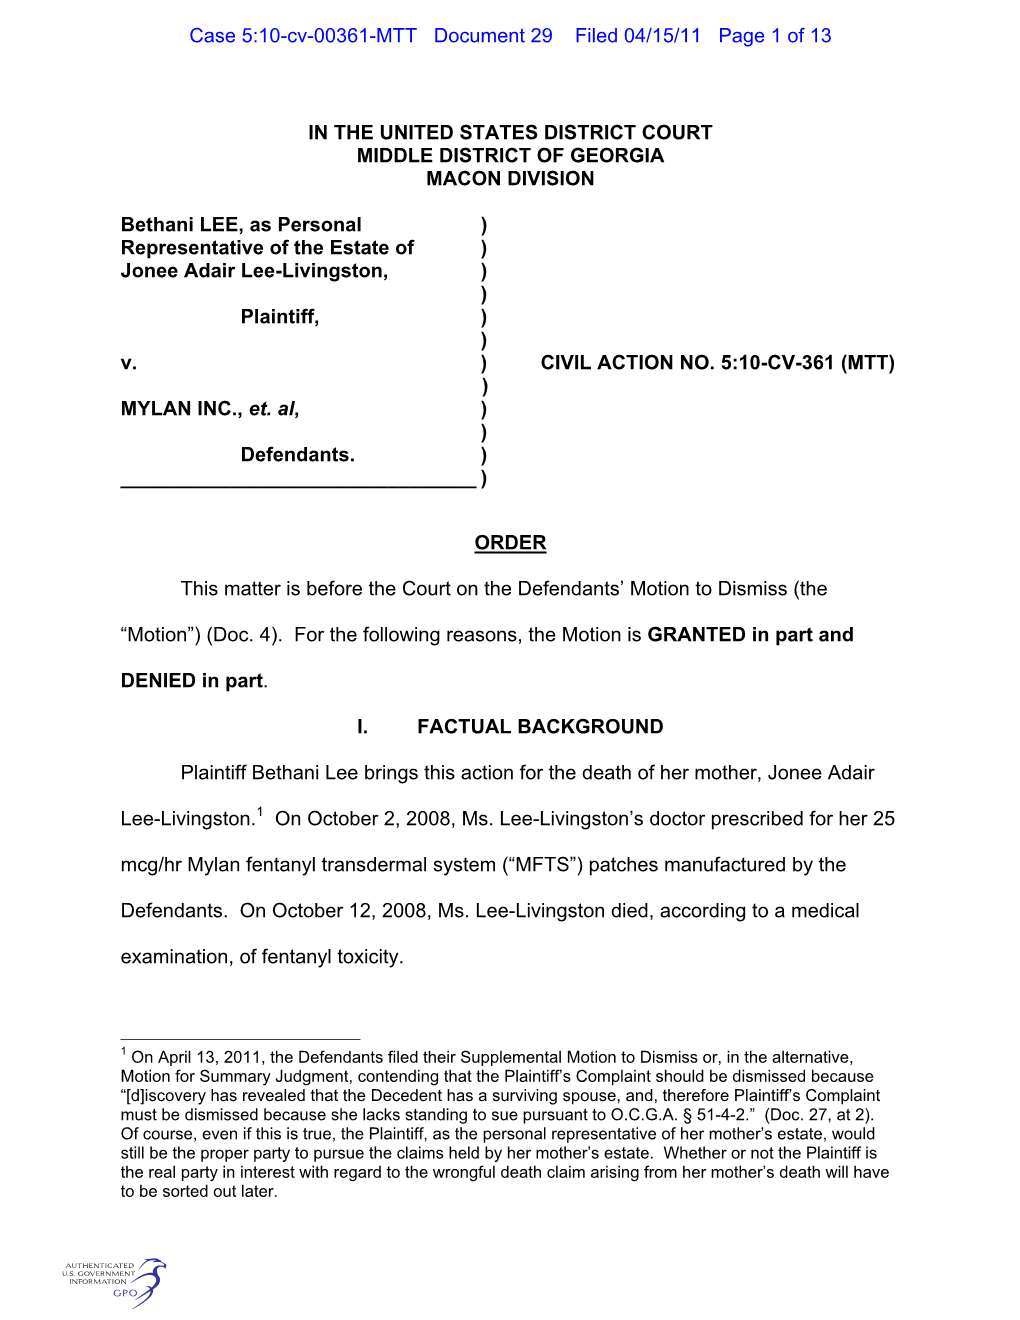 Case 5:10-Cv-00361-MTT Document 29 Filed 04/15/11 Page 1 of 13